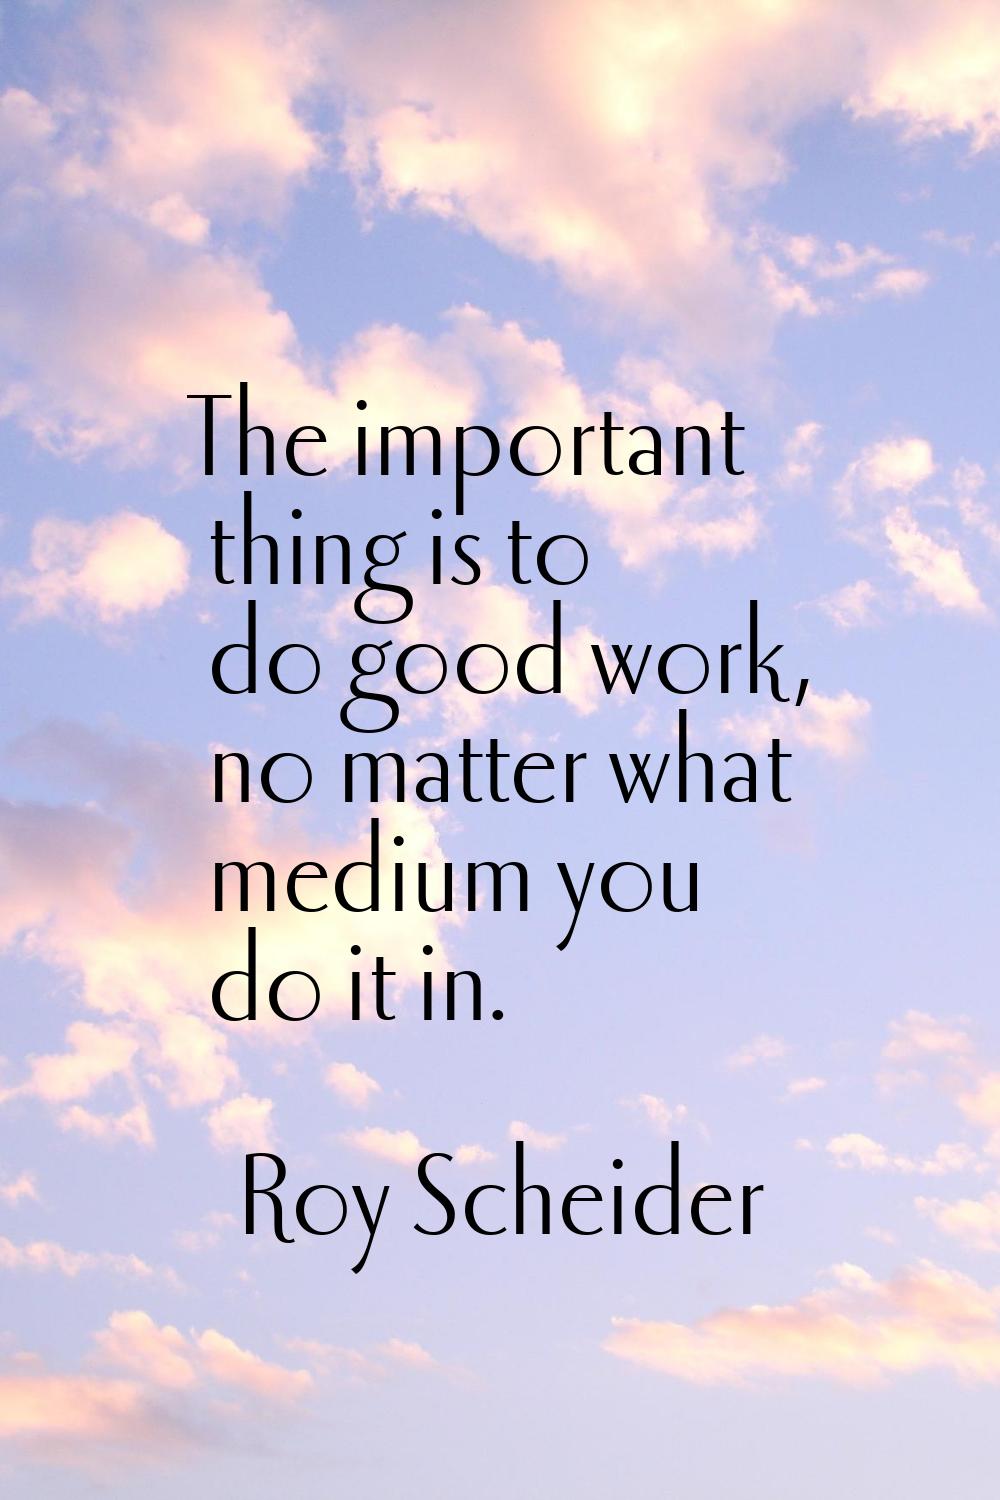 The important thing is to do good work, no matter what medium you do it in.